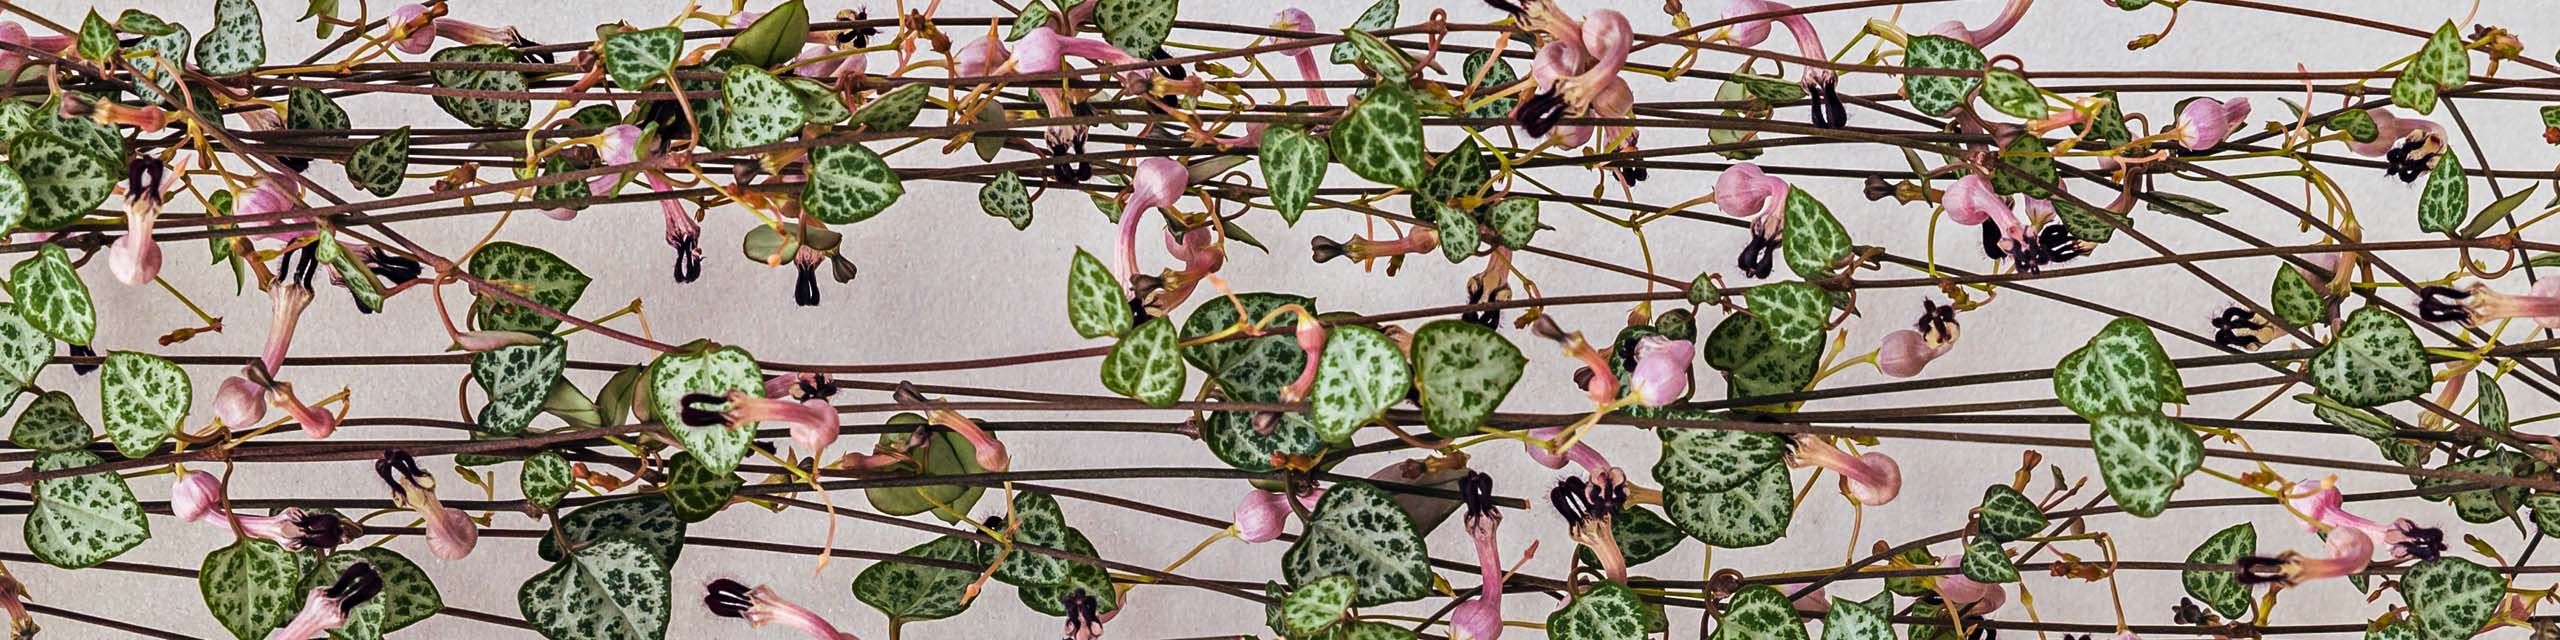 Trailing leaves of a variegated Ceropegia Woodii or string of hearts plant.